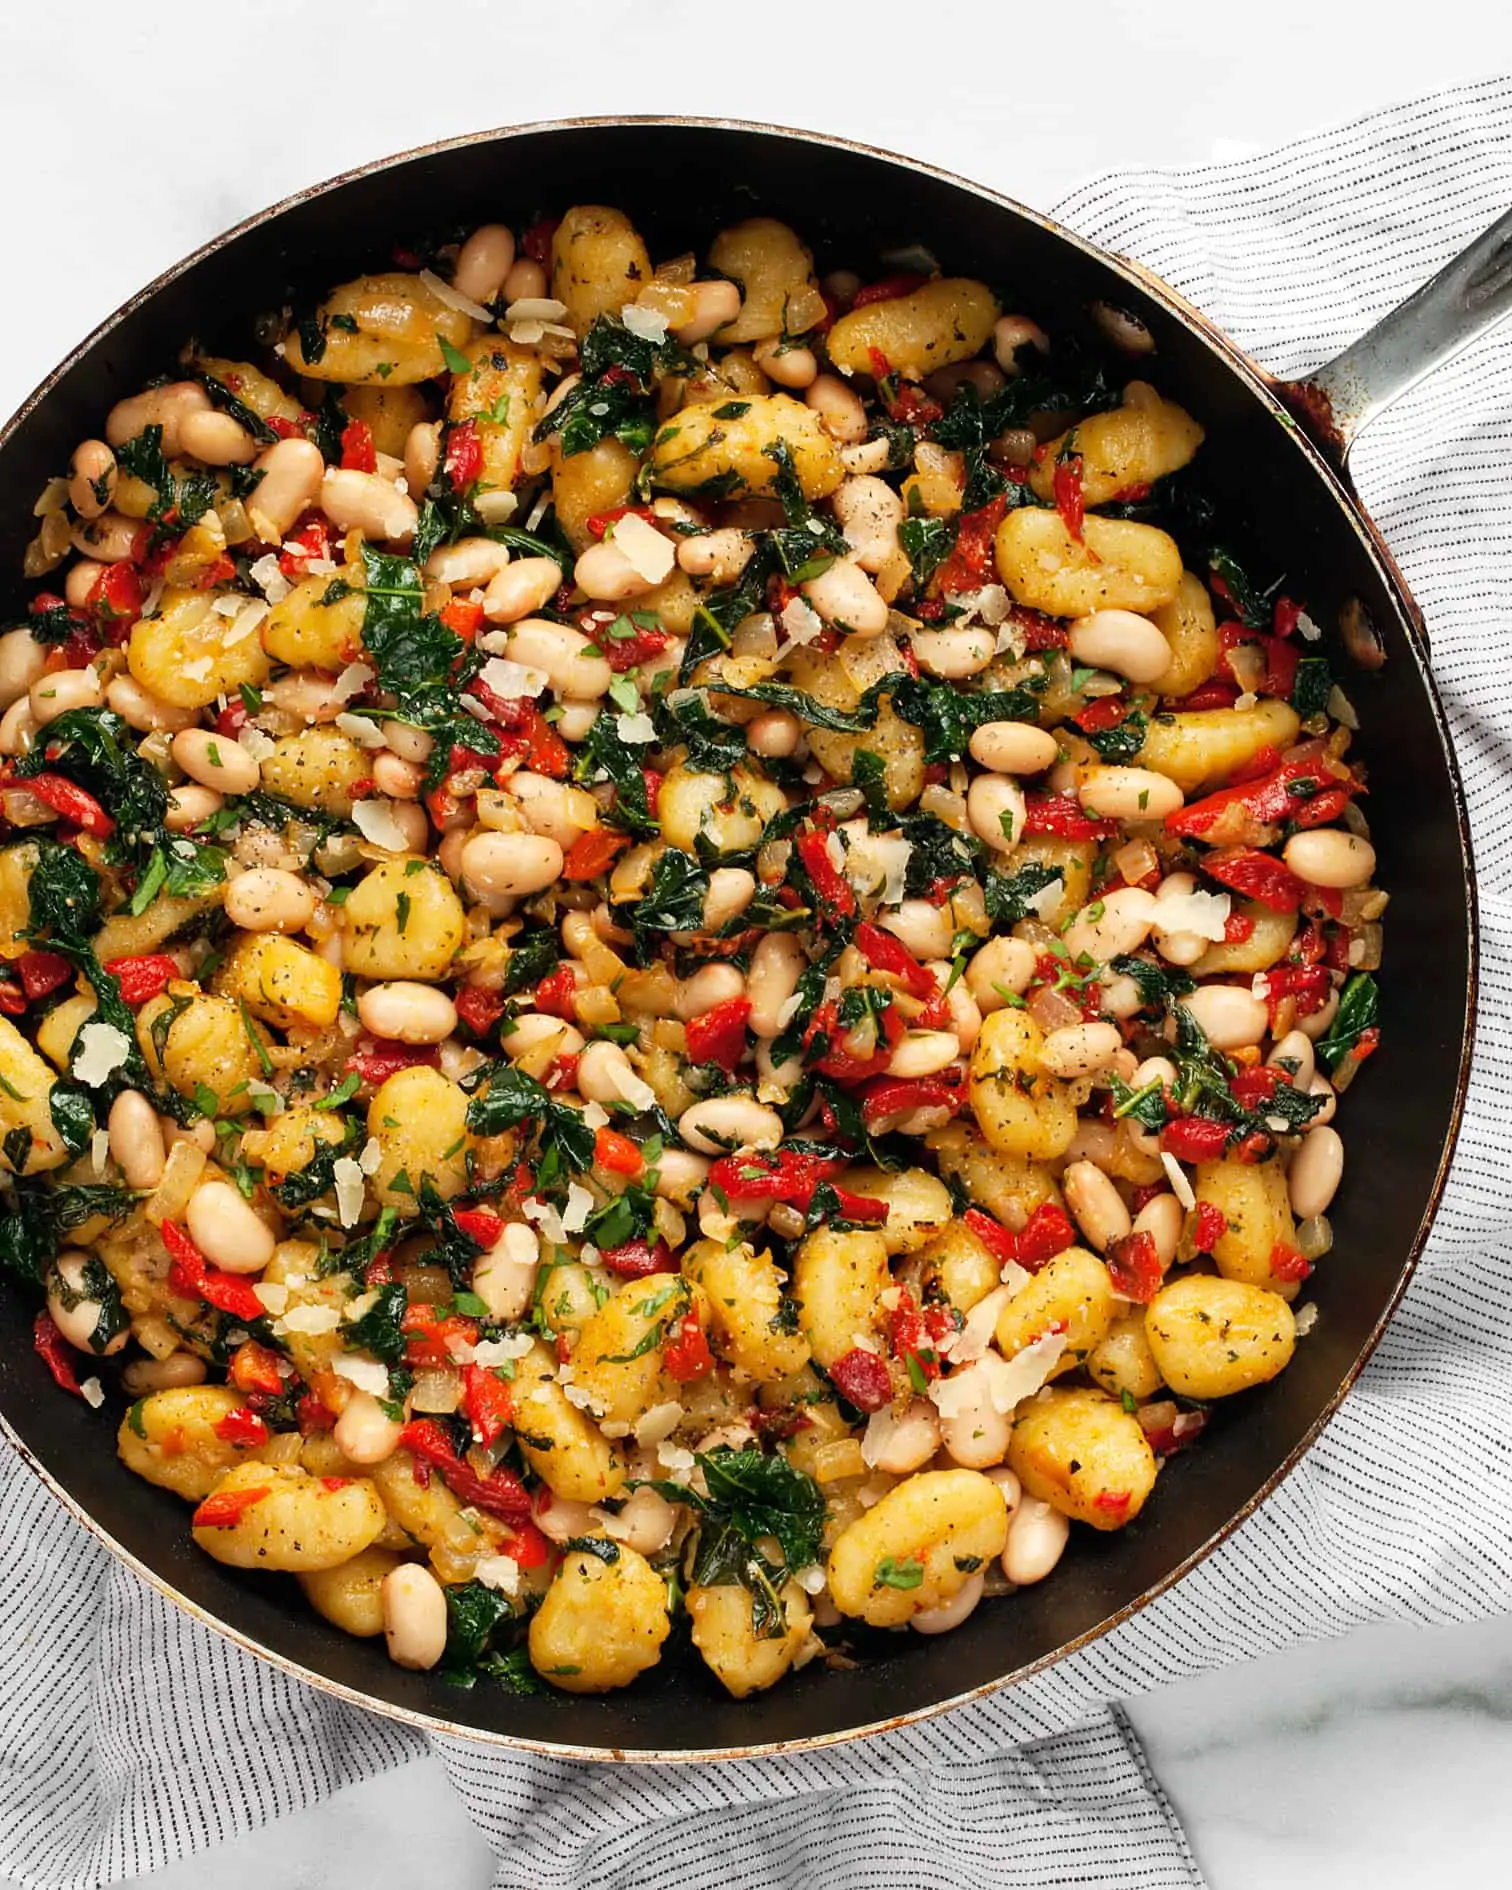 Cooked gnocchi in skillet with white beans, red peppers and kale